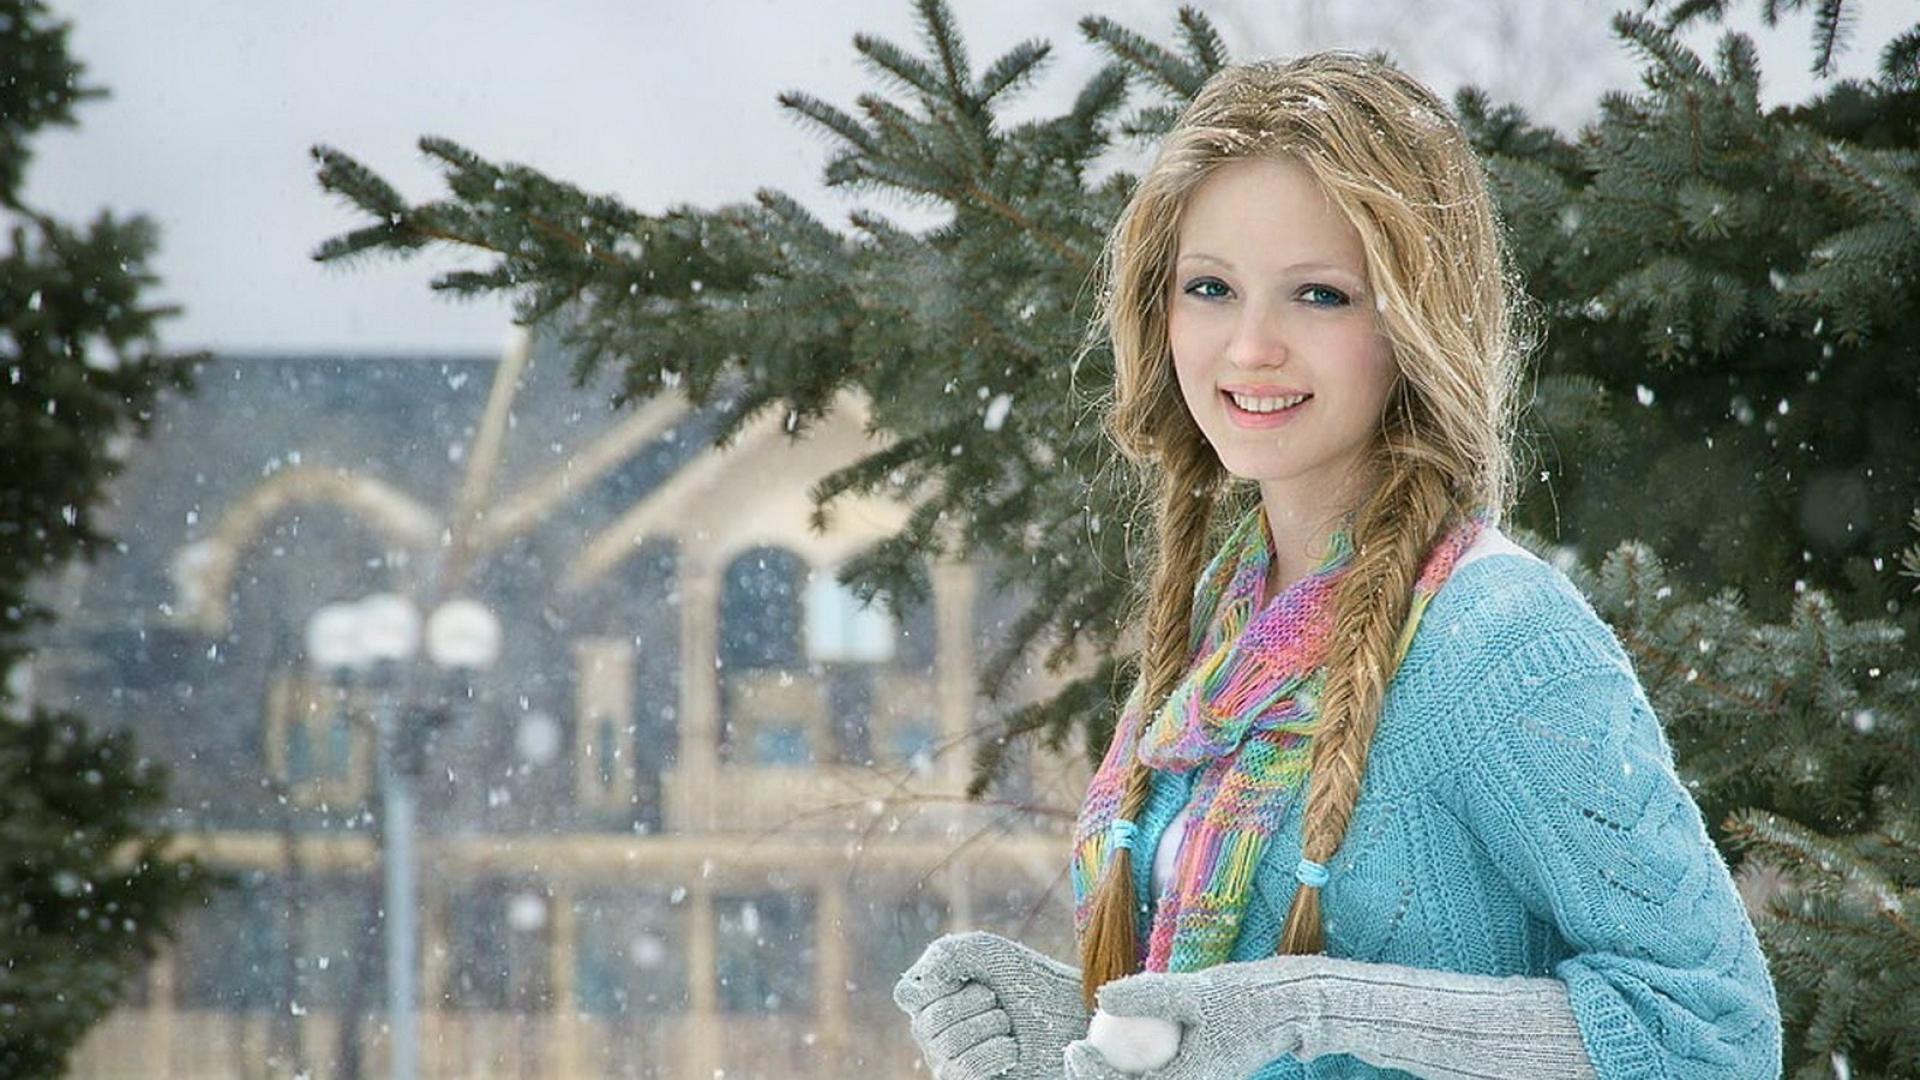 Blondes snow teen outdoors faces wallpaper HD 1920x1080.